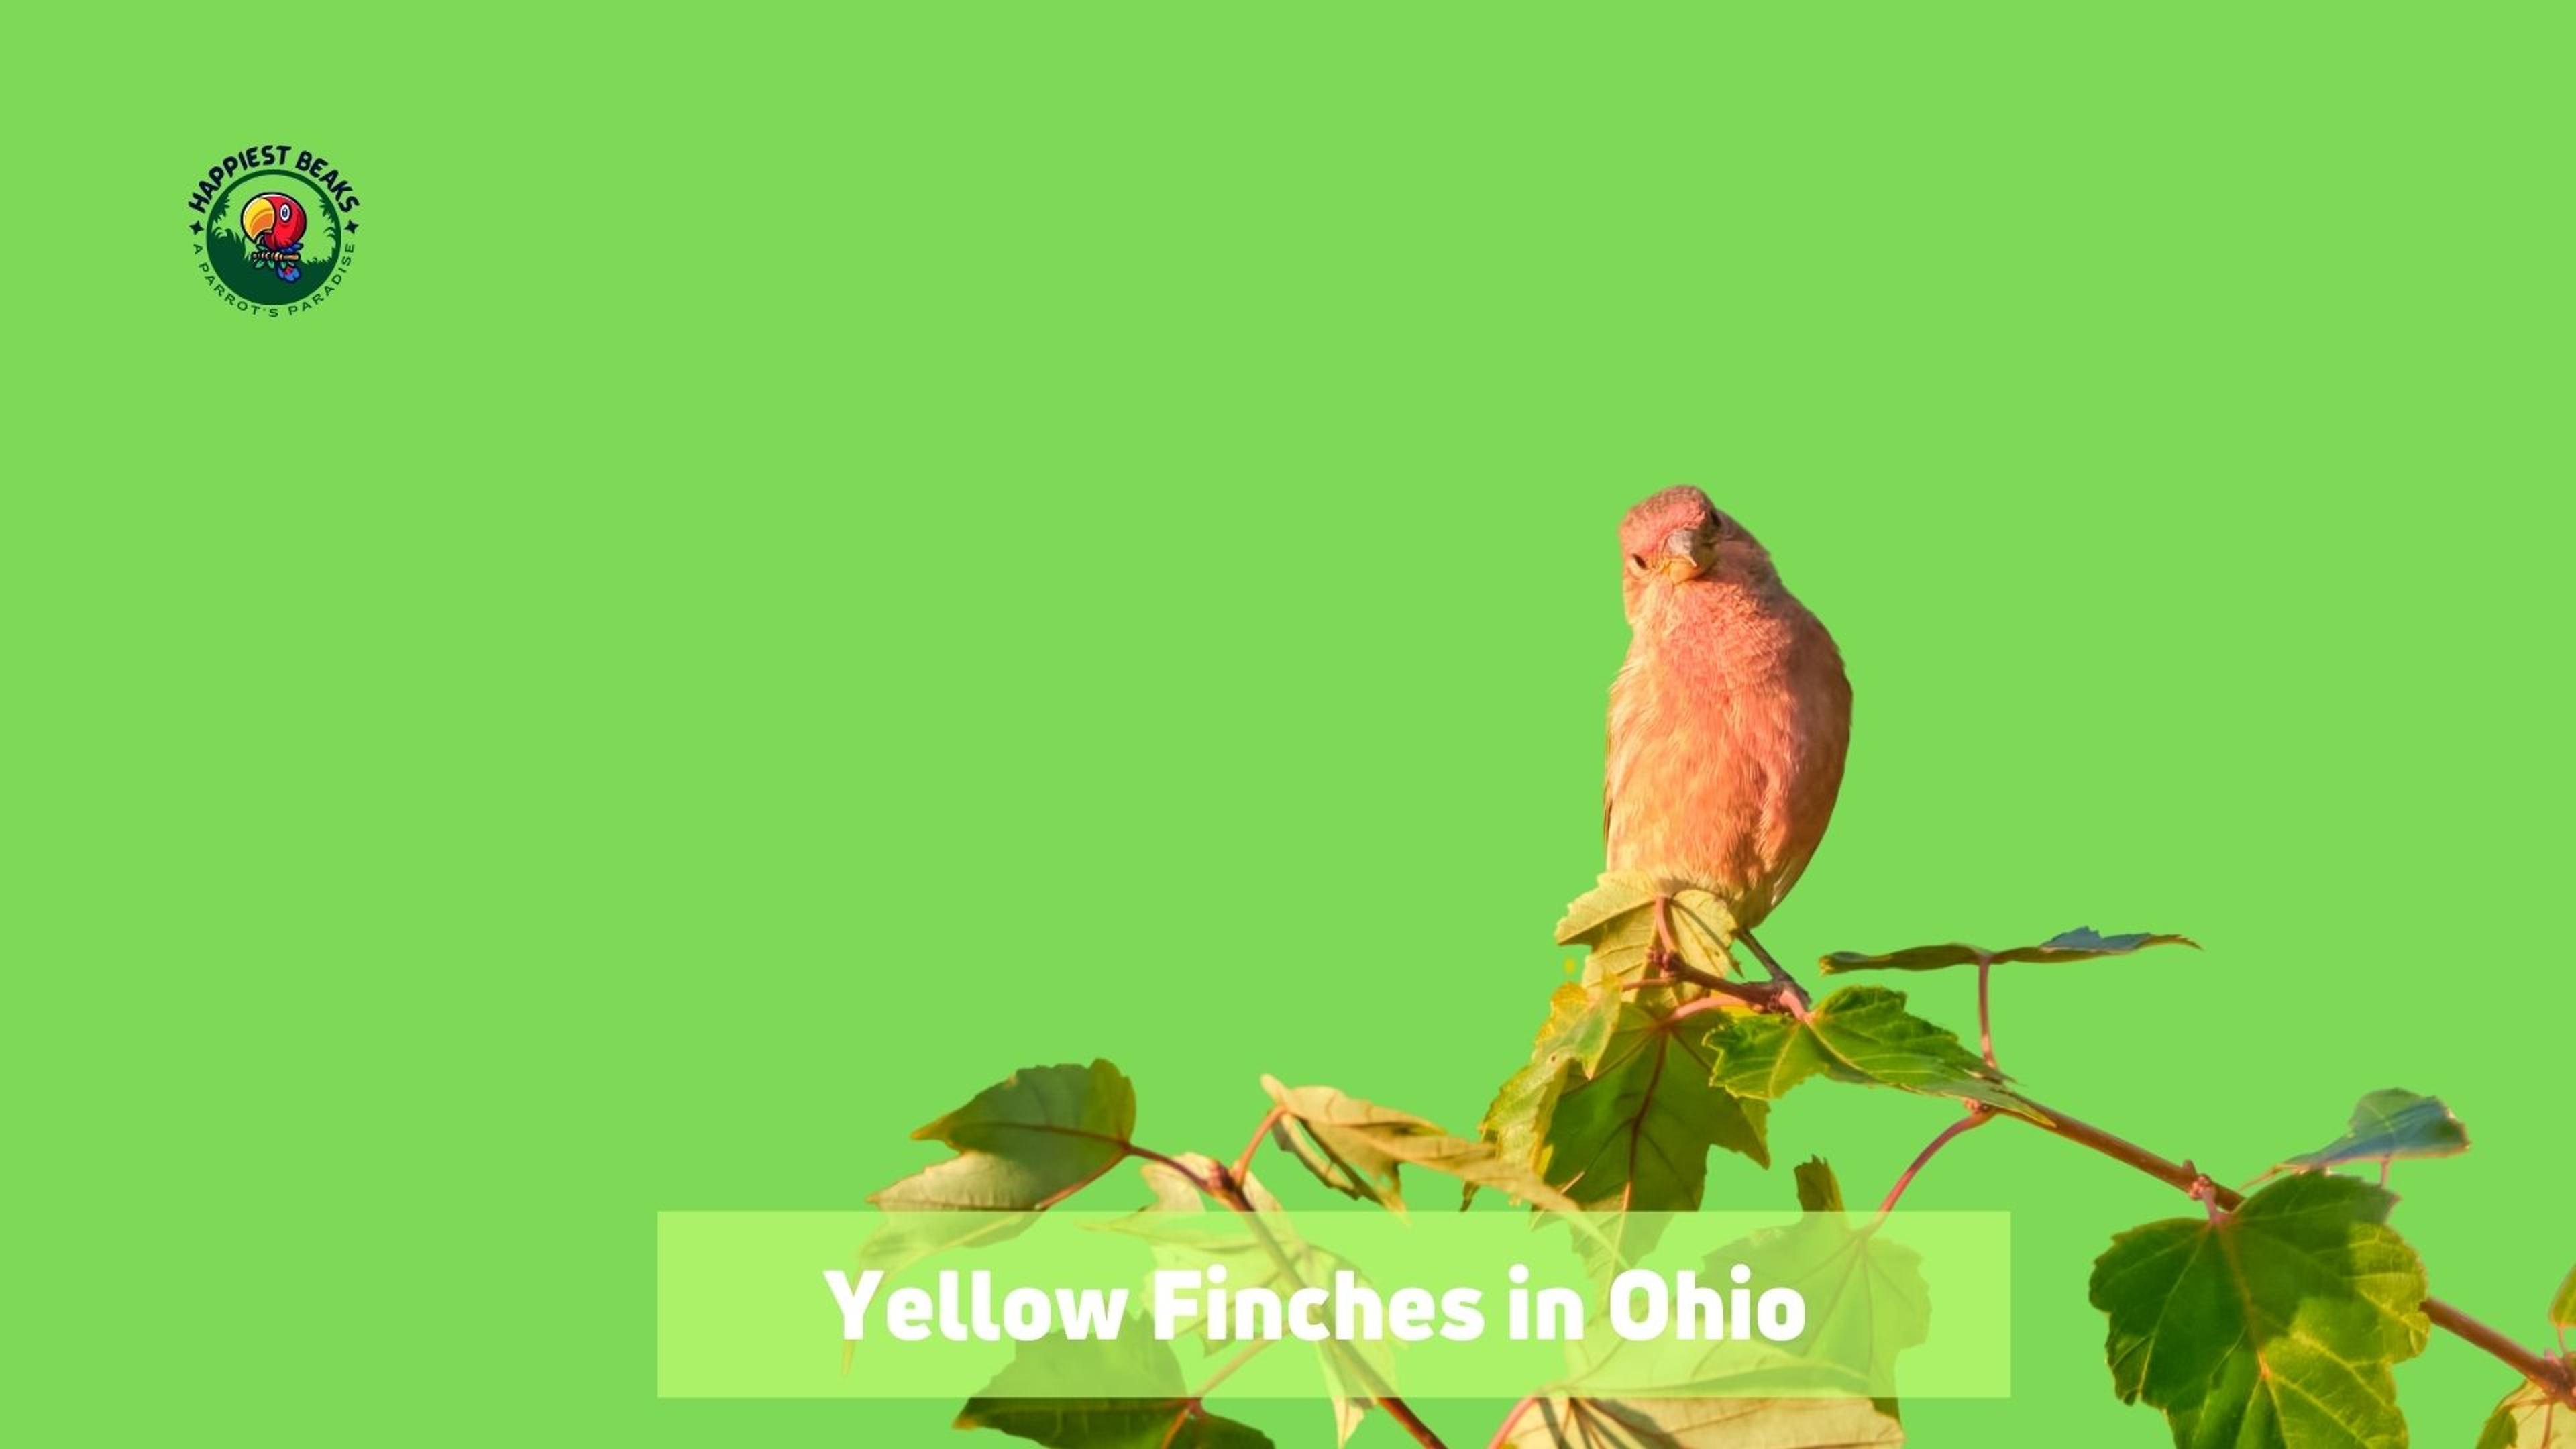 Yellow Finches in Ohio